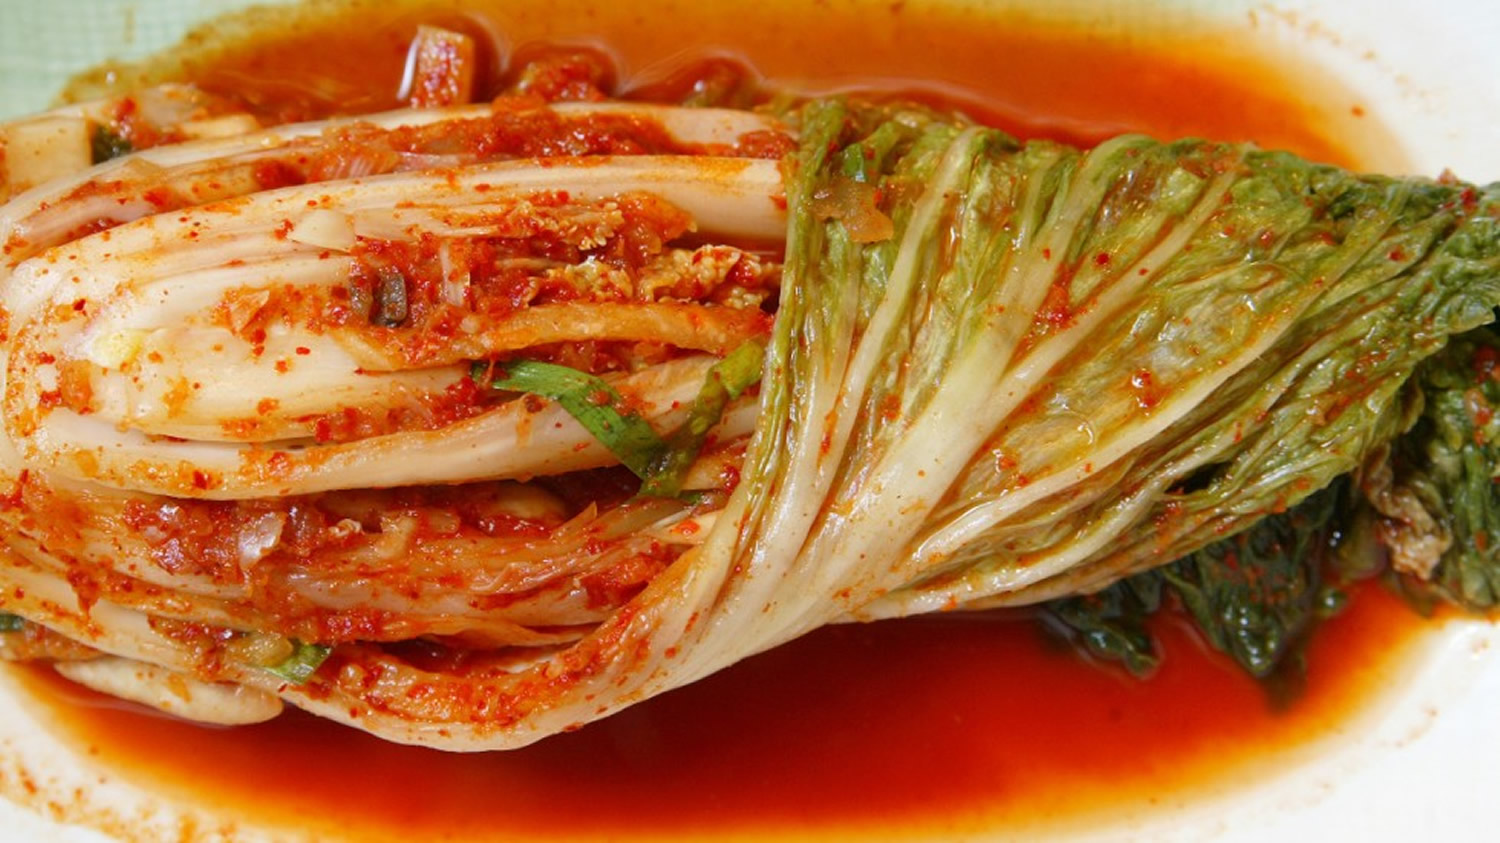 Kimchi - Probiotics, Nutrition Facts & Calories - Is Kimchi Good For You?